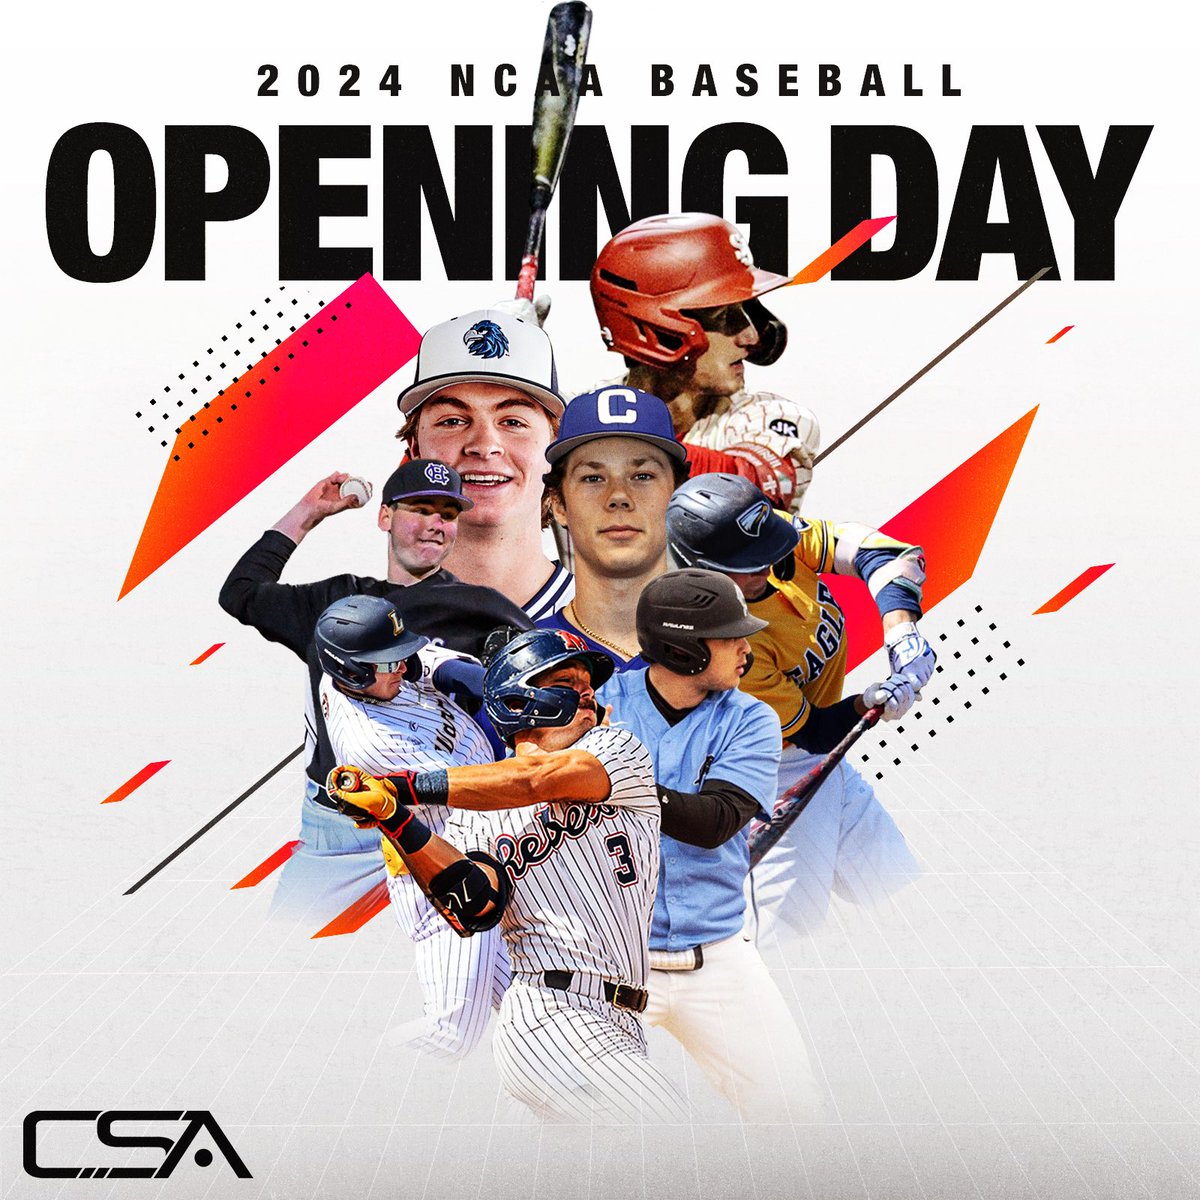 Opening Day‼️ Good luck to our #teamCSA alumni and all the players & coaches as the season kicks off ⚾️